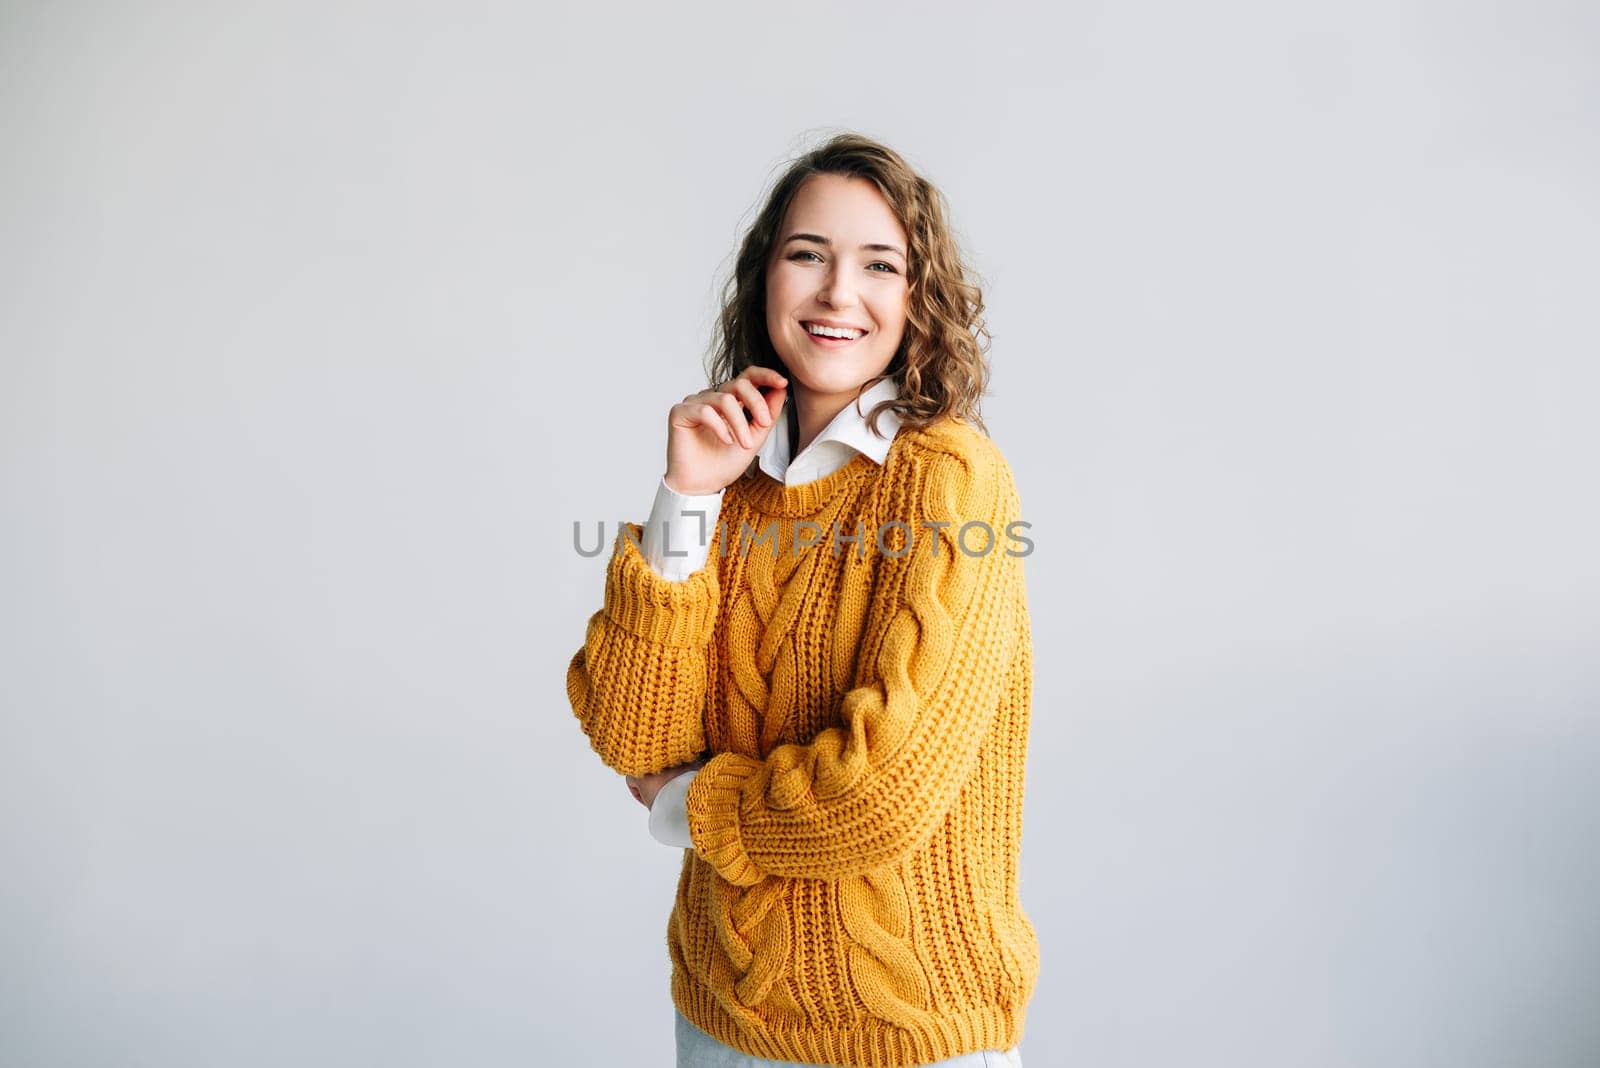 Joyful Young Woman: Smiling, Beautiful, and Charming Model - Positive, Cheerful, and Pretty - Curly-haired Student Laughs, Looks at Camera - Isolated Portrait on White Background - Expressive and Satisfied Expression by ViShark